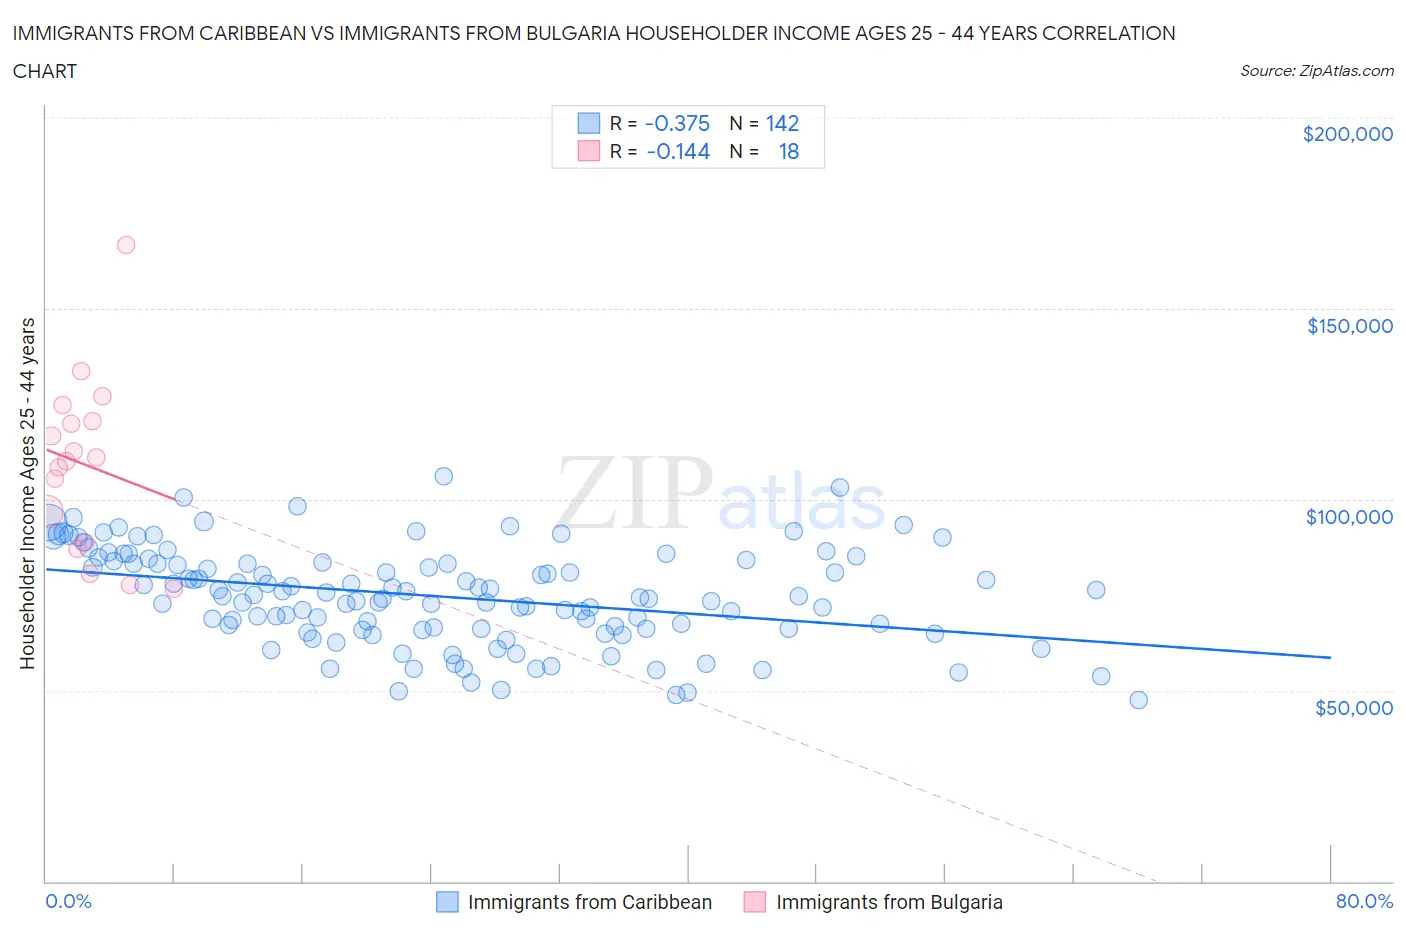 Immigrants from Caribbean vs Immigrants from Bulgaria Householder Income Ages 25 - 44 years